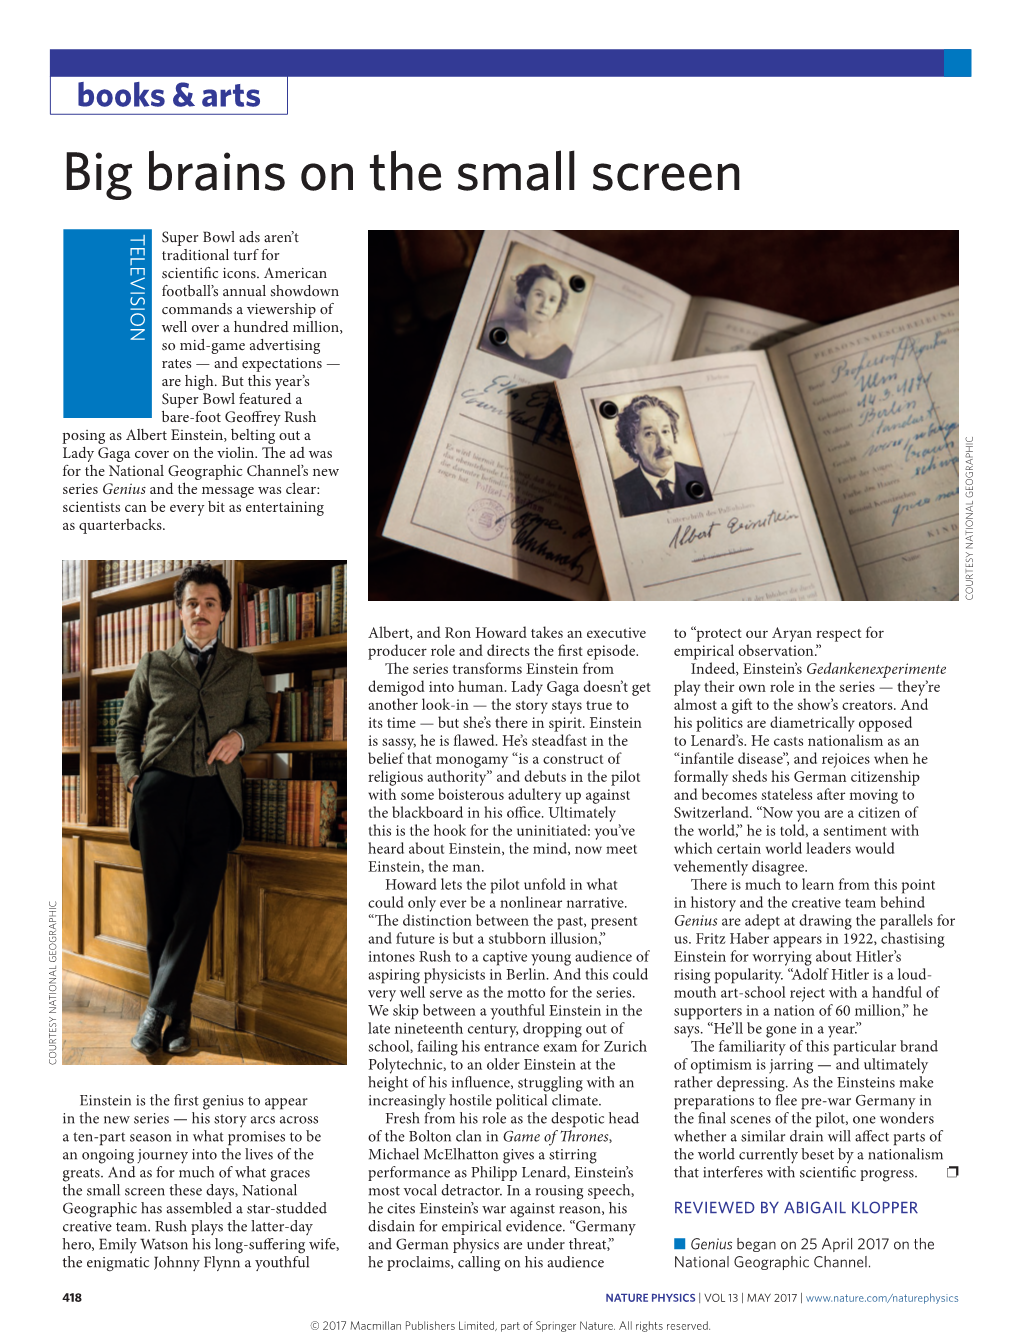 Big Brains on the Small Screen